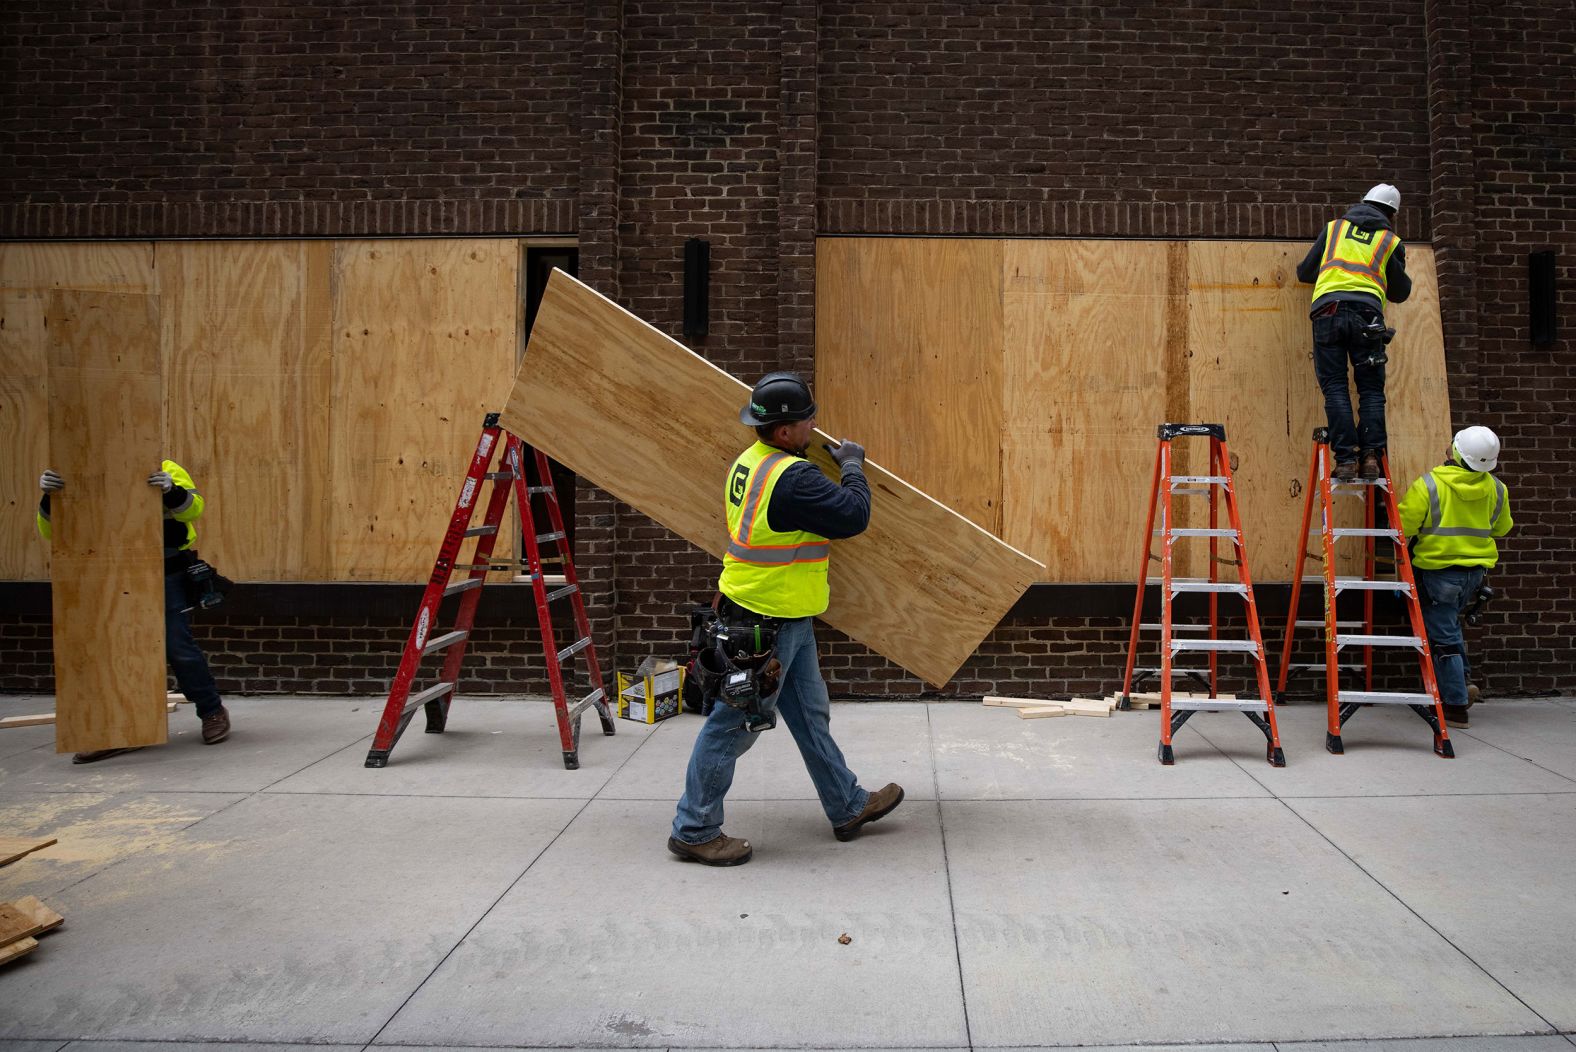 Workers board up businesses near the Hennepin County Government Center on April 20.